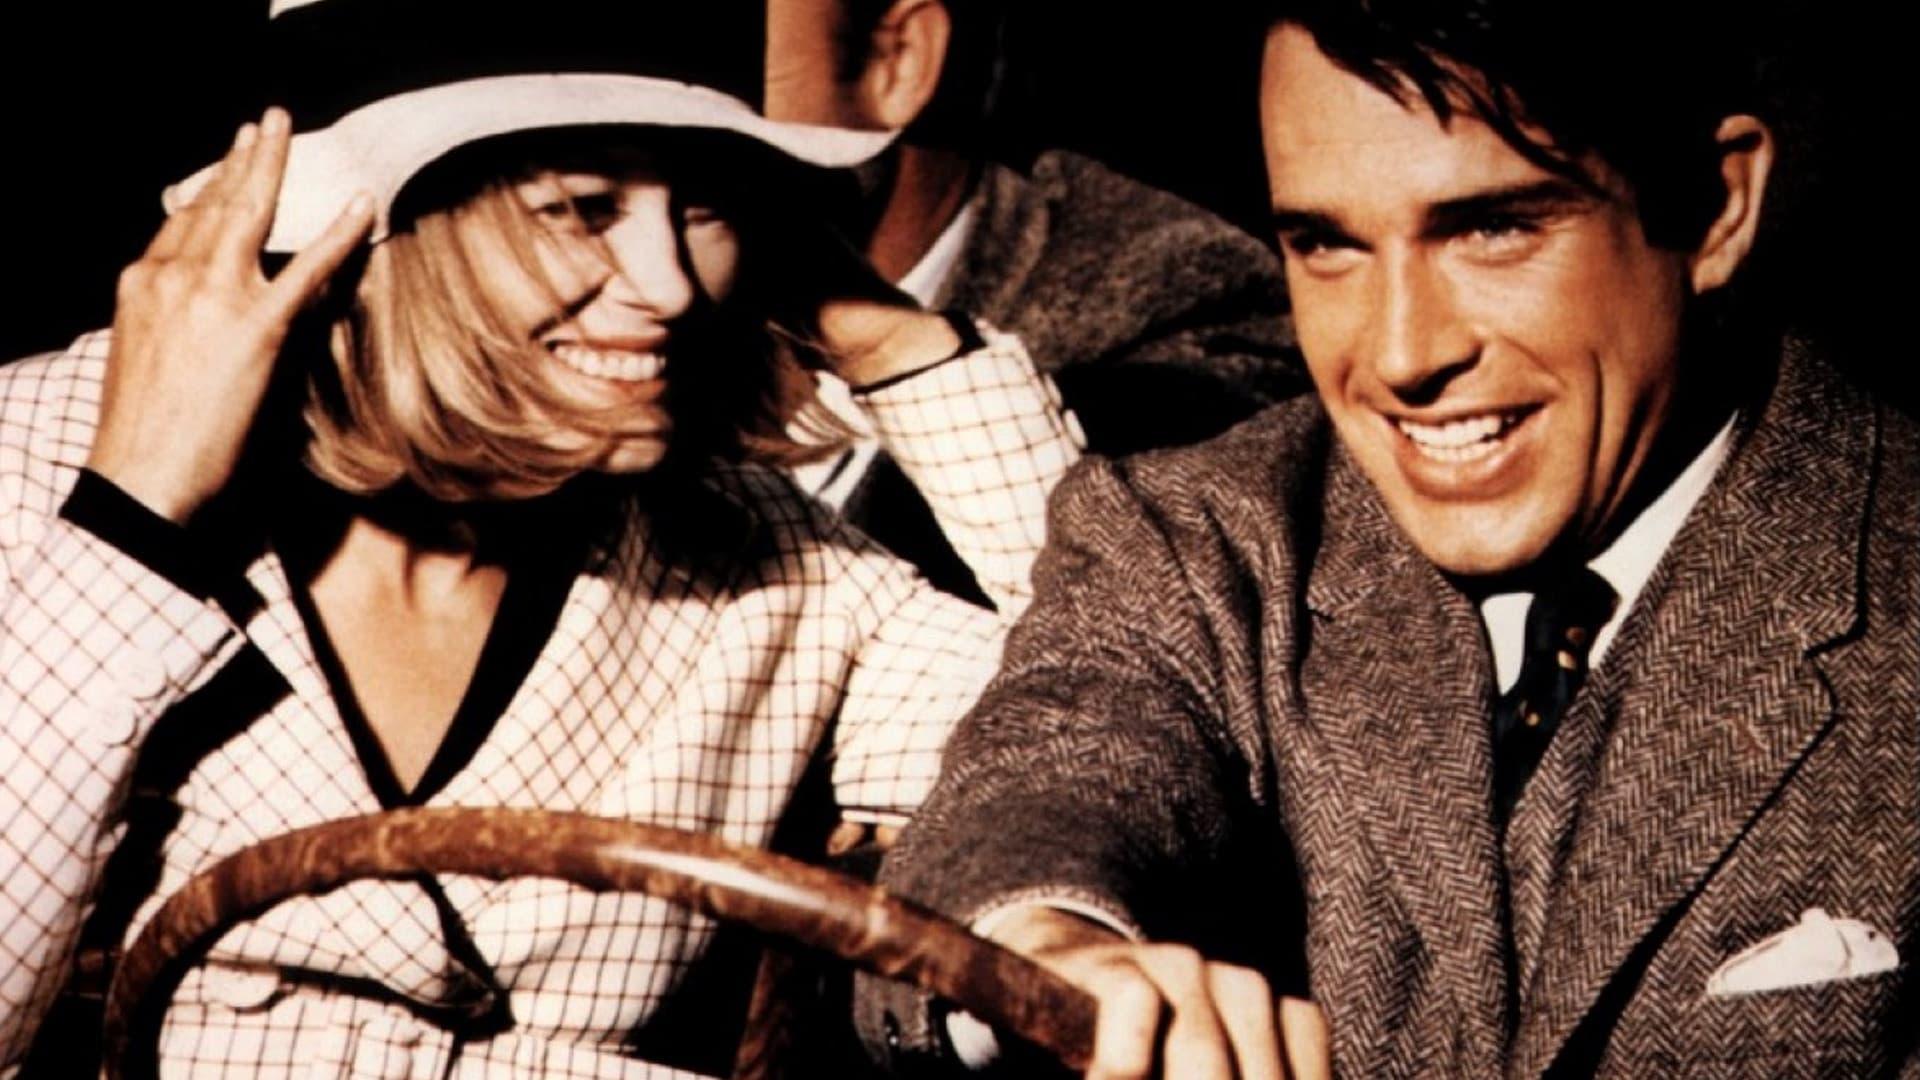 Backdrop Image for Bonnie and Clyde